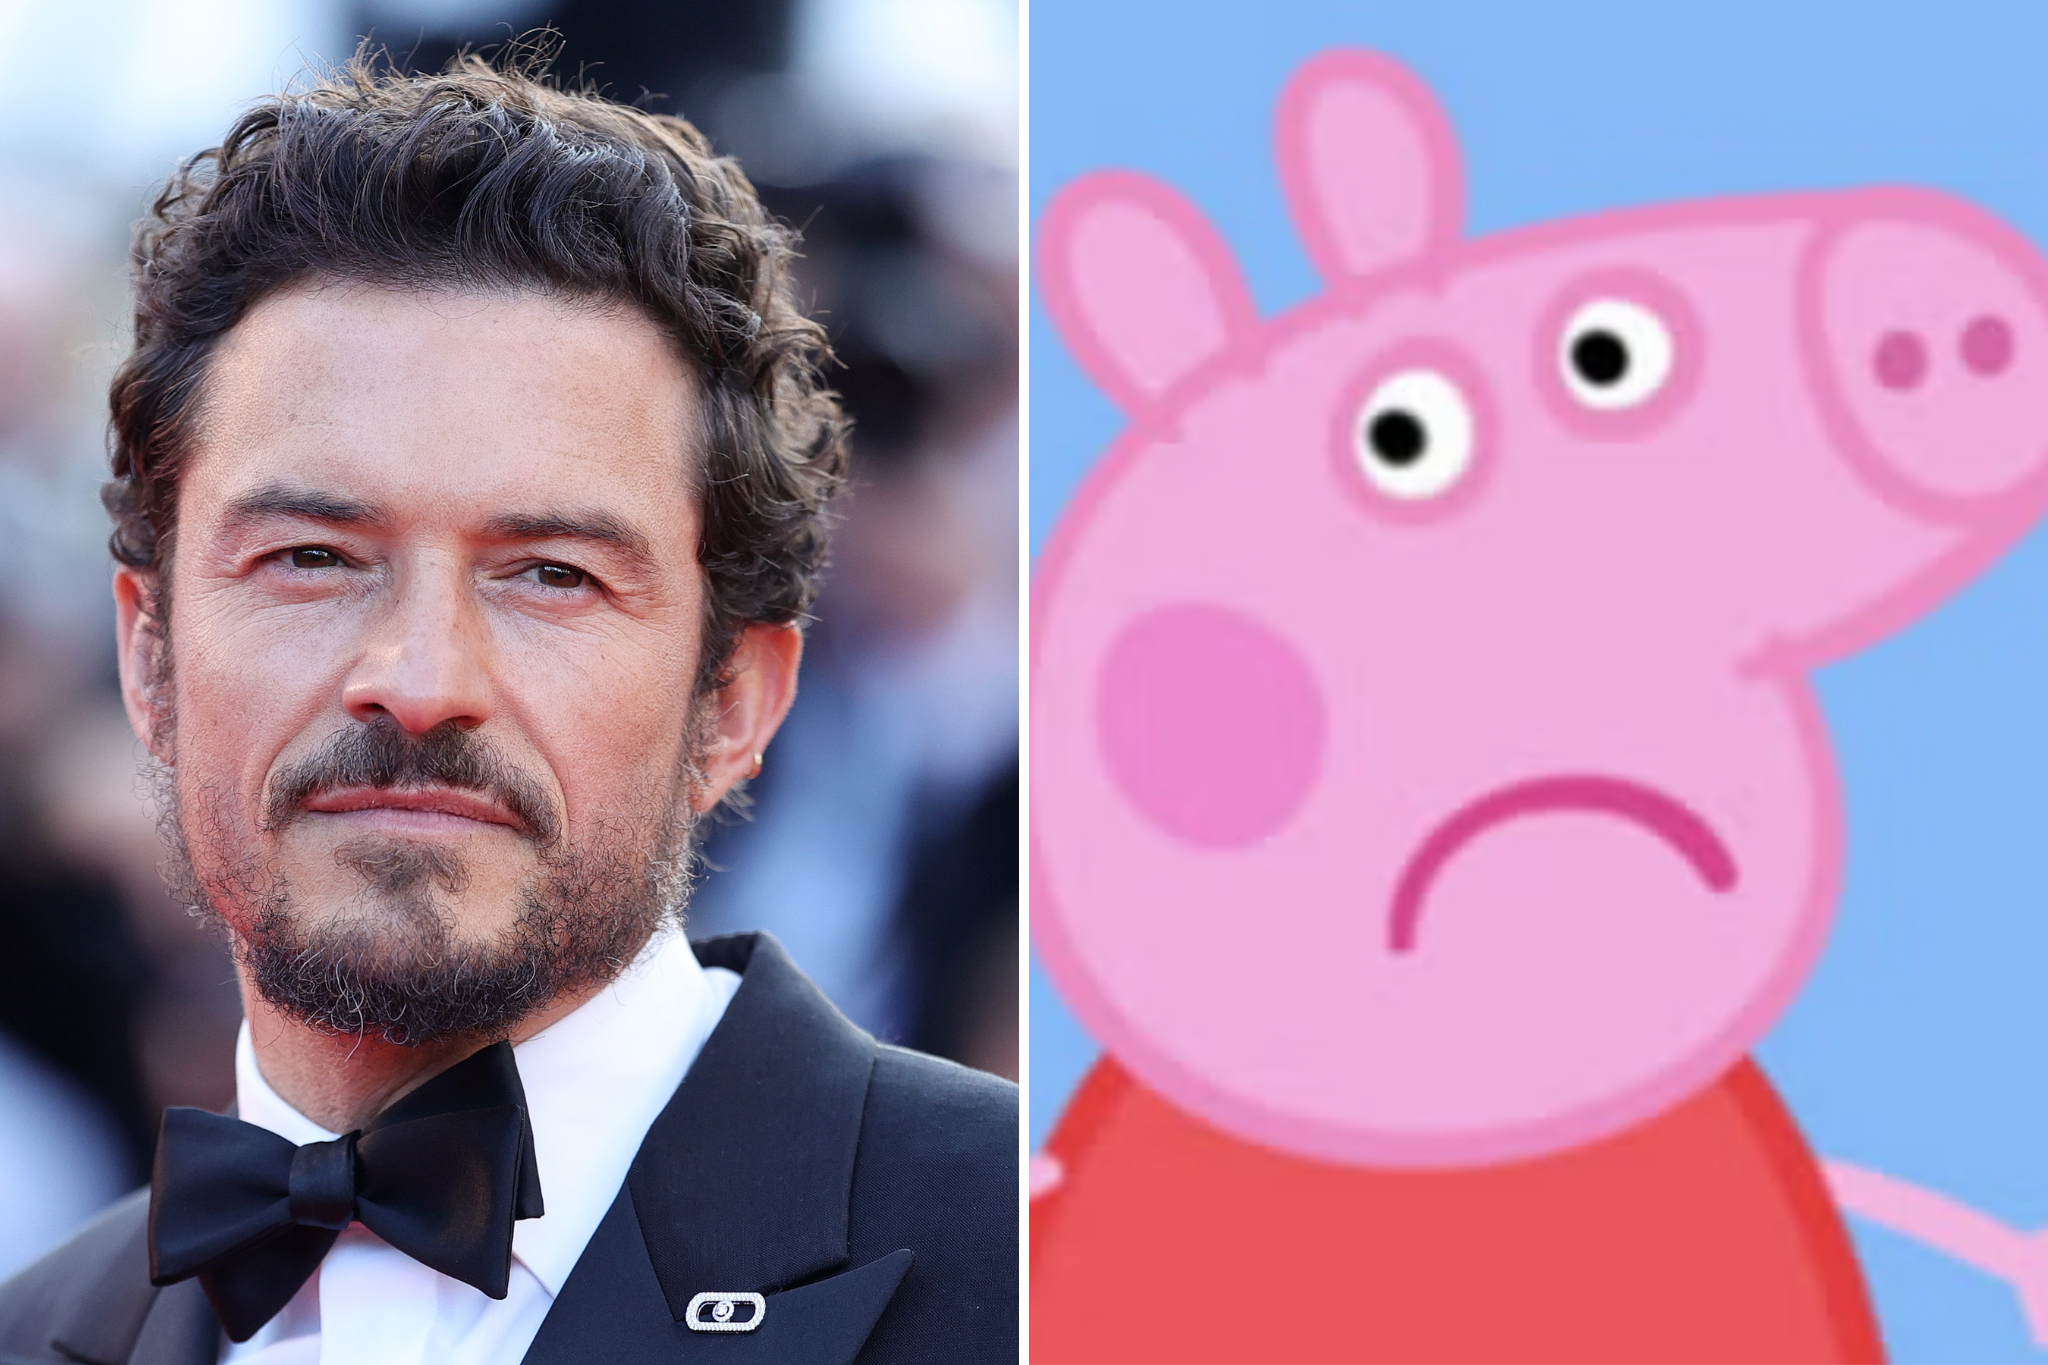 Peppa Pig' Celebrates 20th Anniversary with Multi-Country Cinema